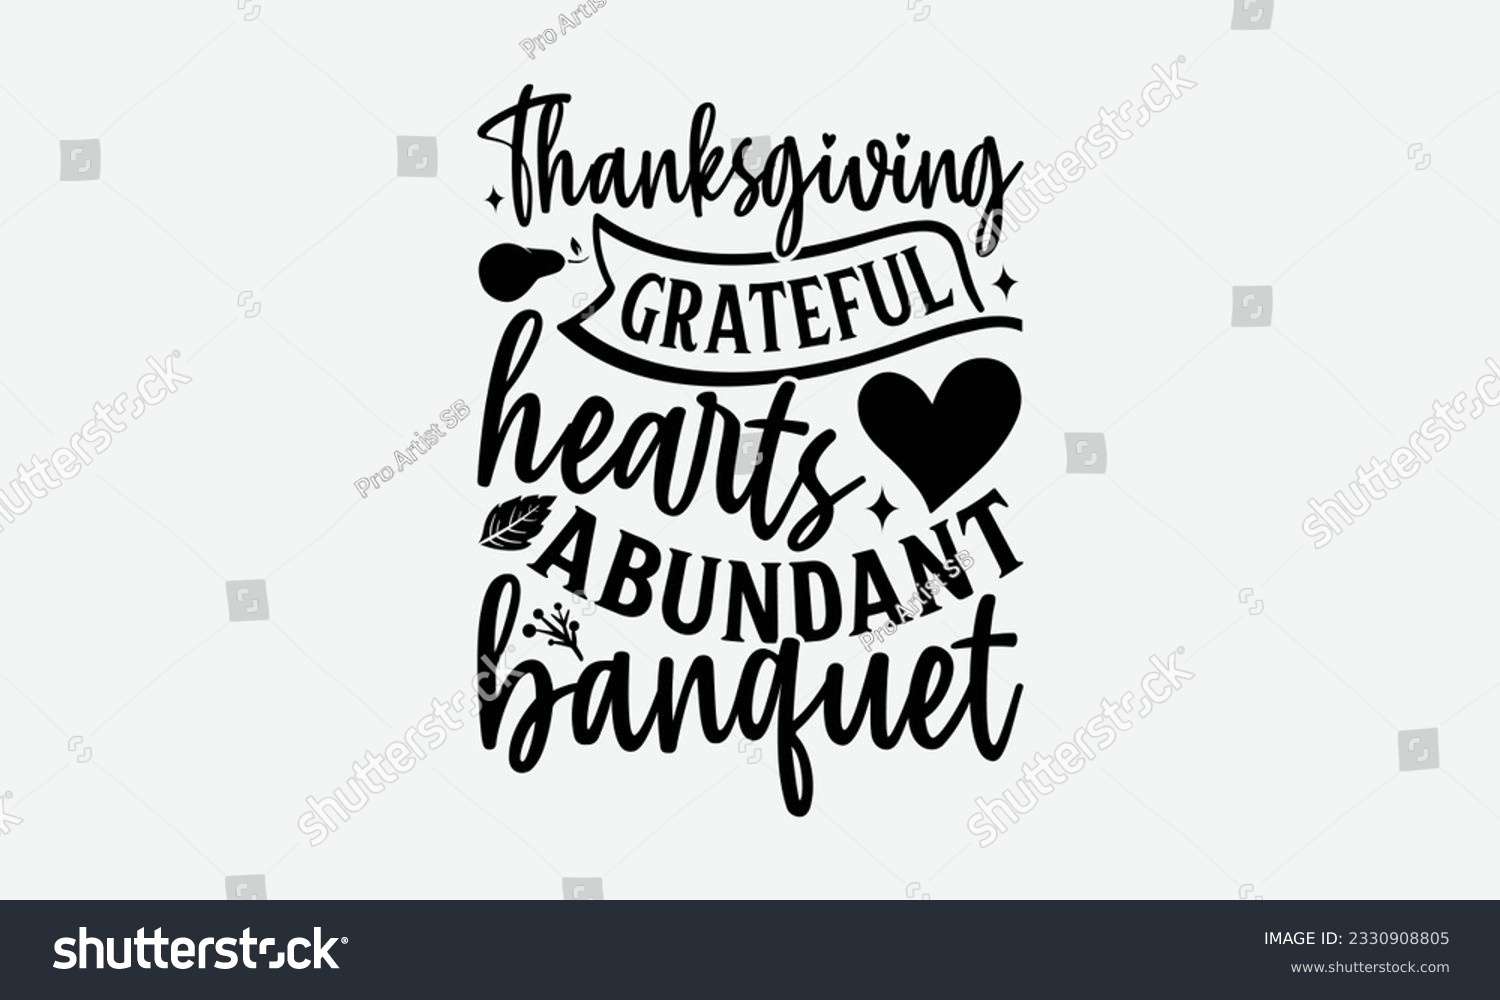 SVG of Thanksgiving Grateful Hearts Abundant Banquet - Thanksgiving T-shirt Design Template, Thanksgiving Quotes File, Hand Drawn Lettering Phrase, SVG Files for Cutting Cricut and Silhouette. svg